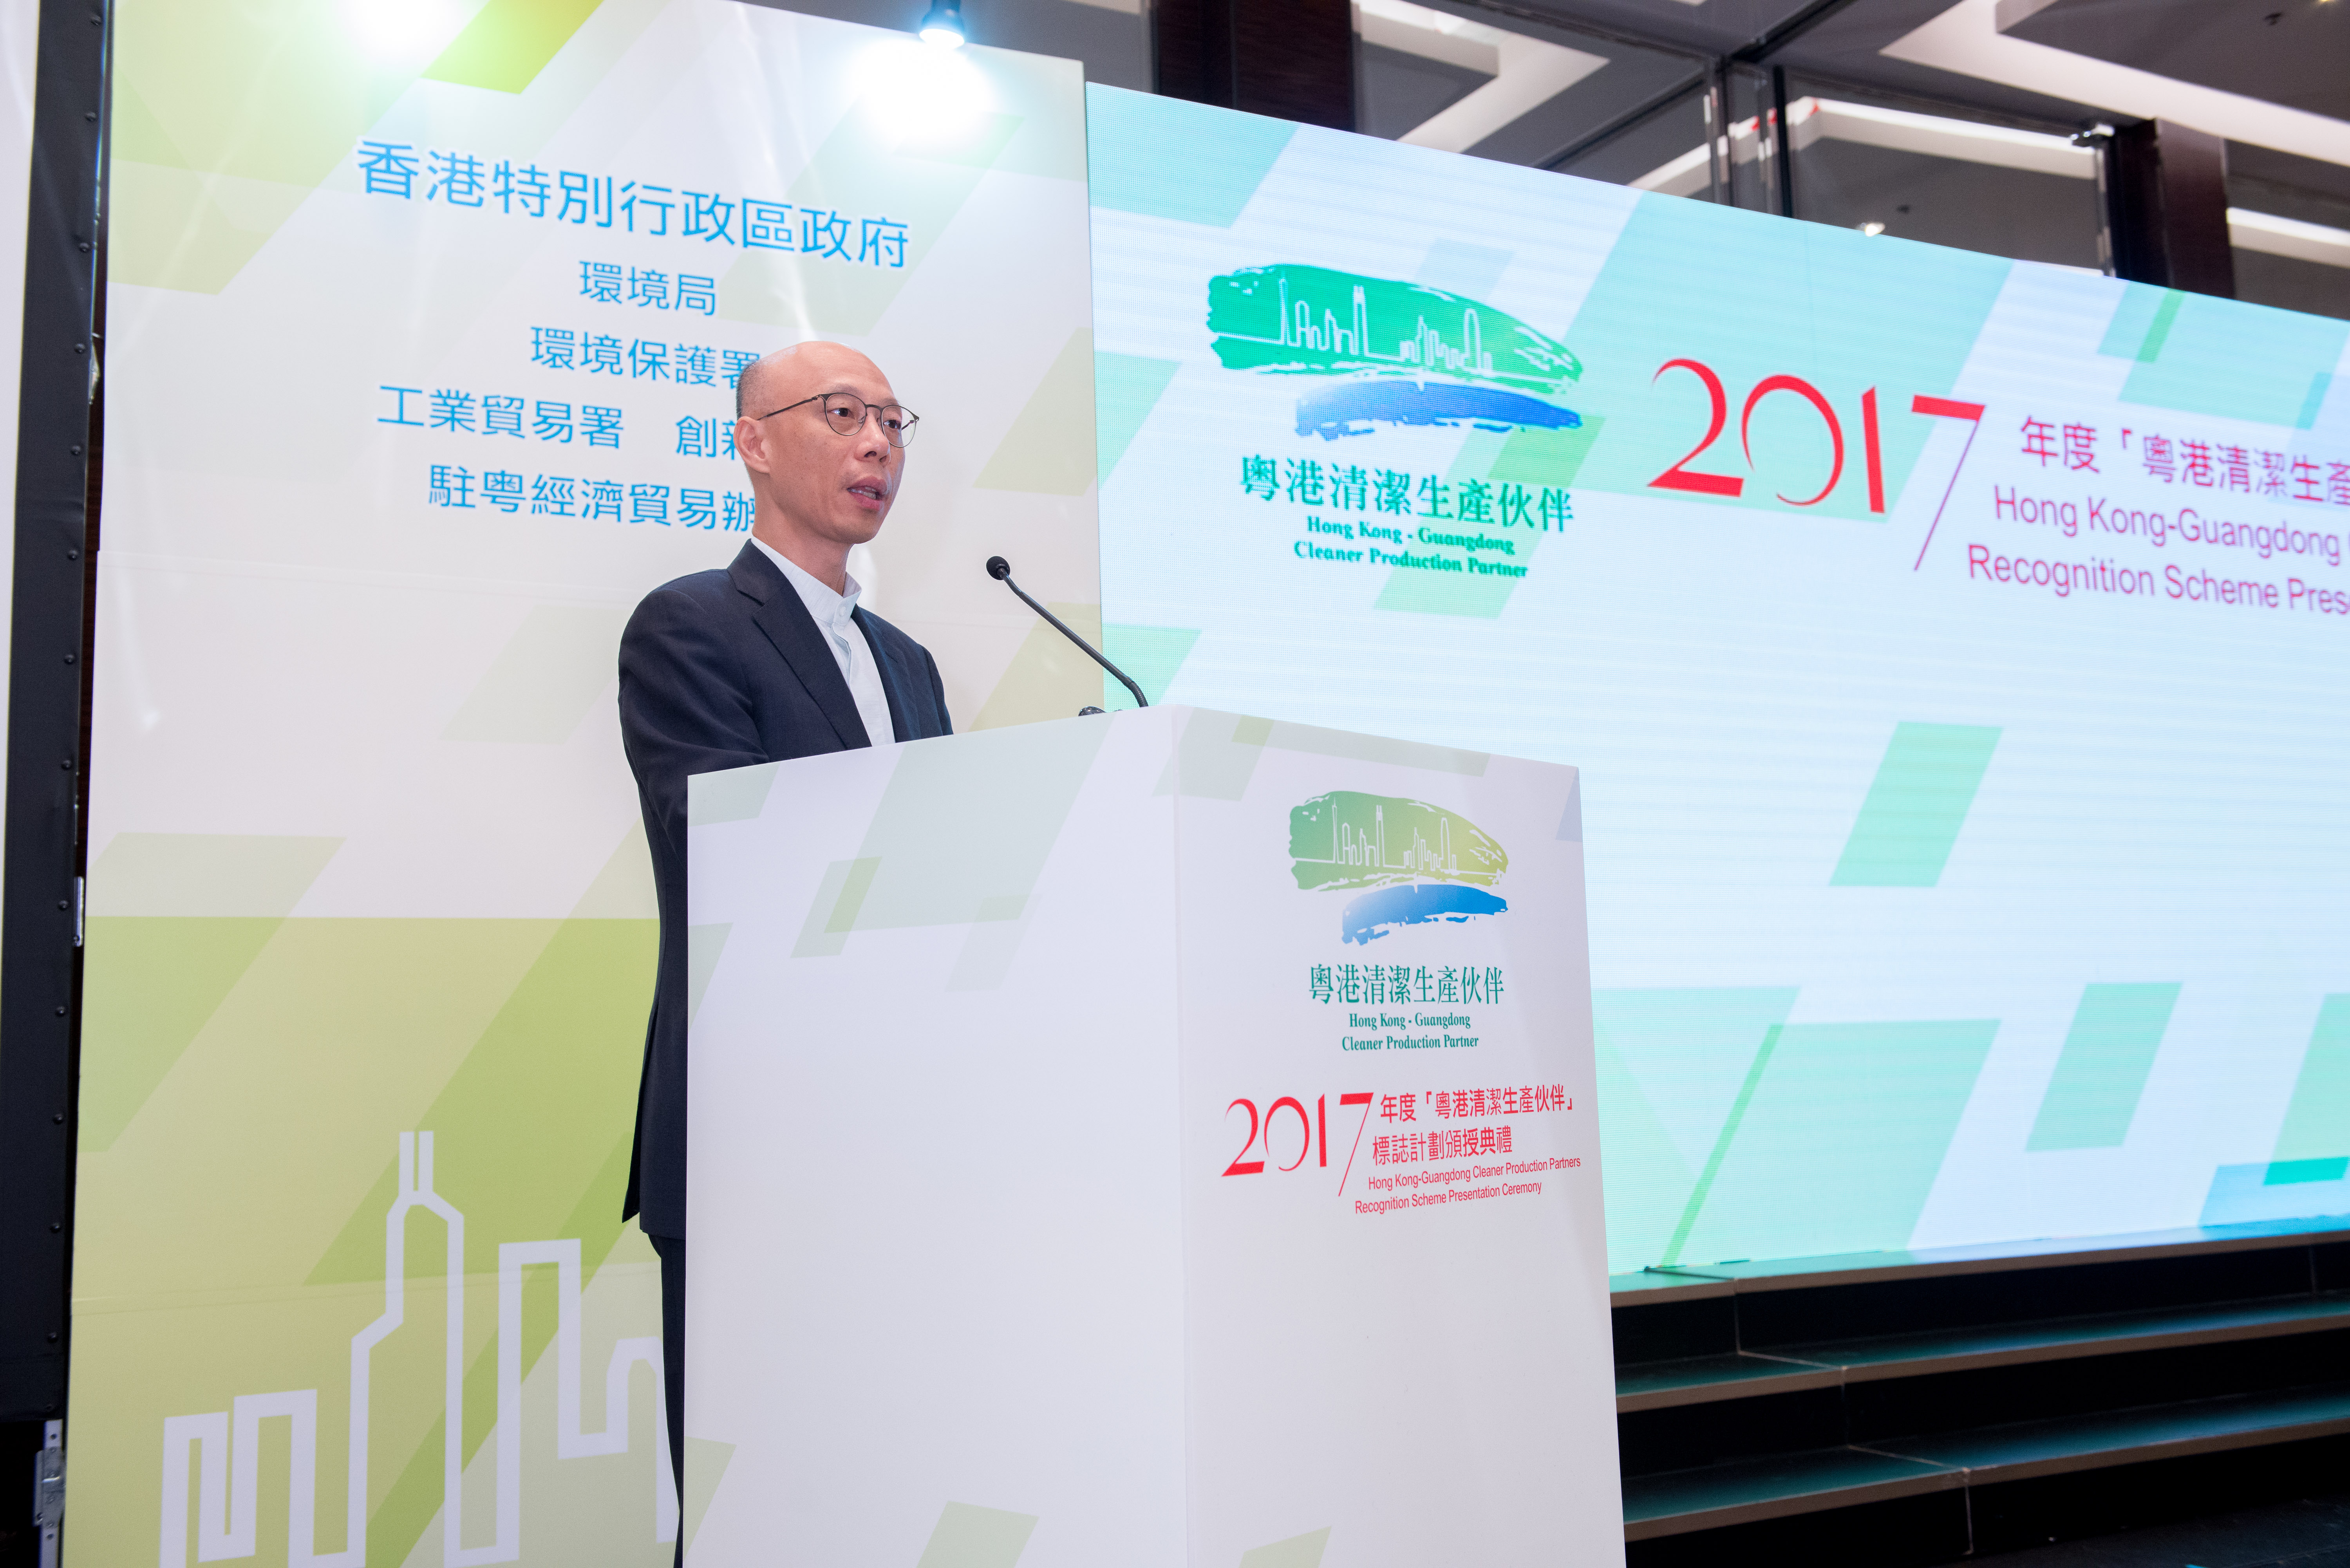 The Secretary for the Environment, Mr Wong Kam-sing, commends the efforts of Hong Kong-owned enterprises in pursuing cleaner production at the ninth presentation ceremony of the Hong Kong-Guangdong Cleaner Production Partners Recognition Scheme